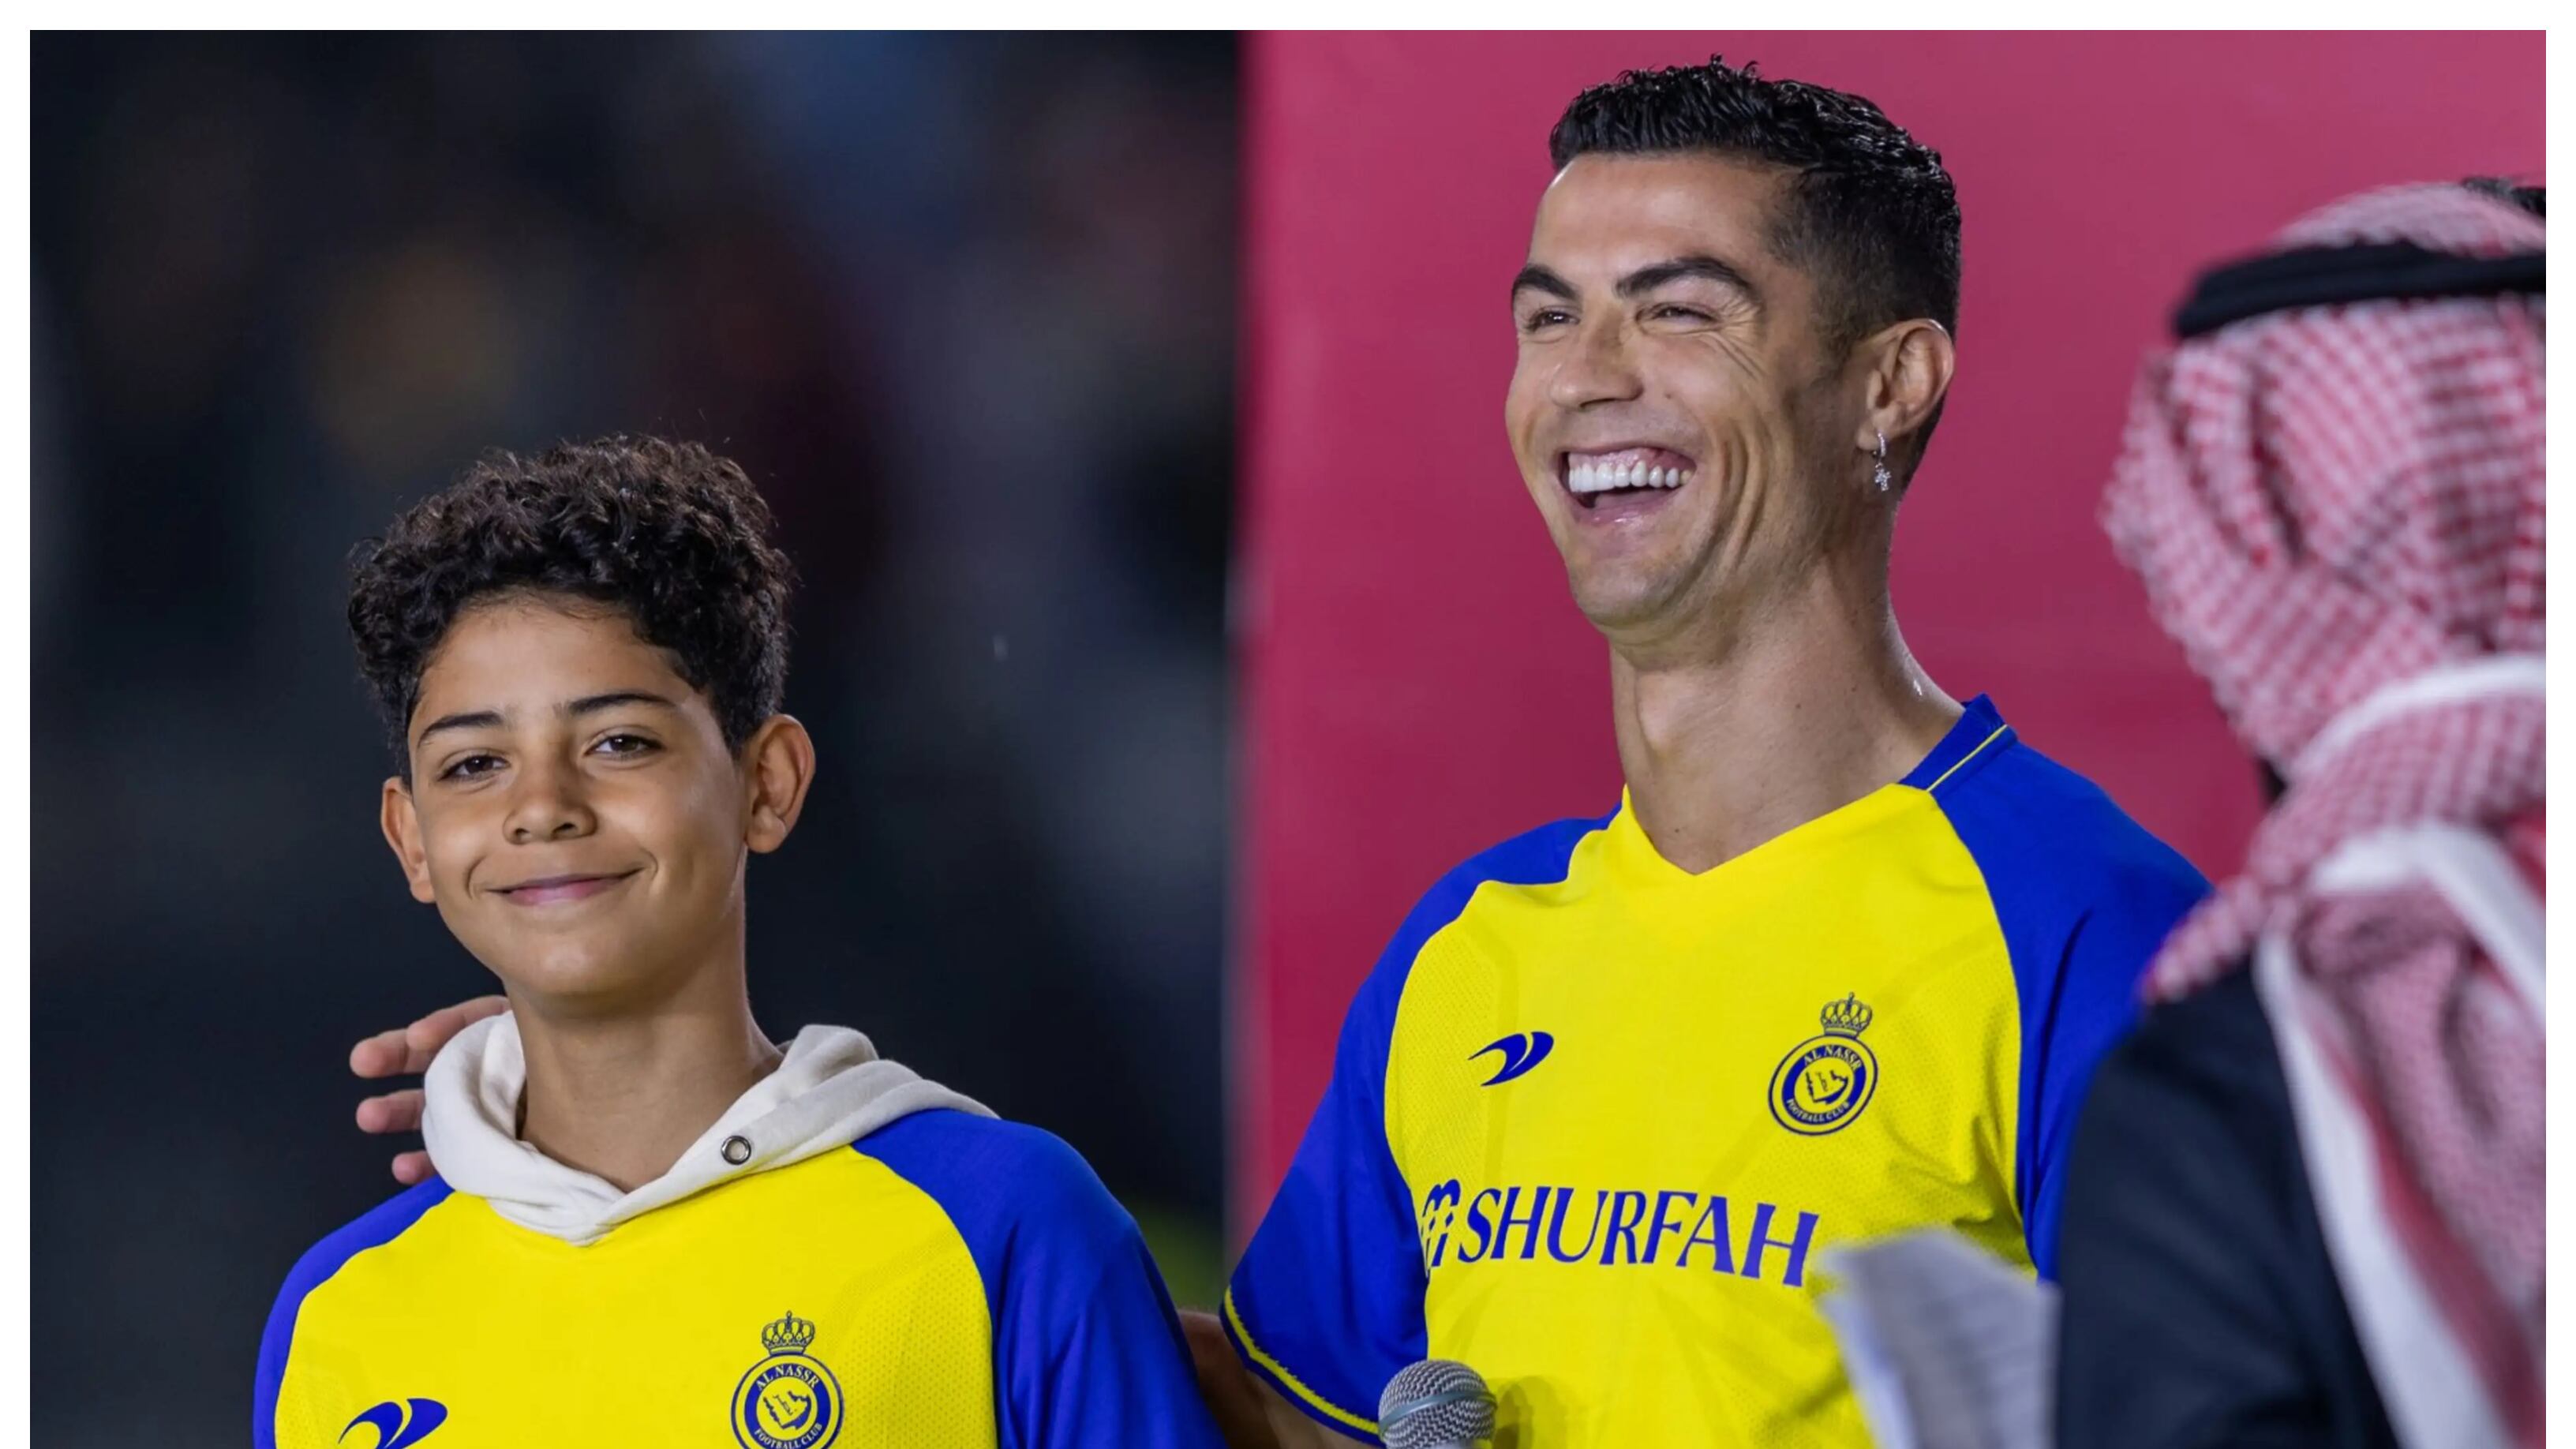 Cristiano Ronaldo is now having problems with Ronaldo Jr as he scolds him again